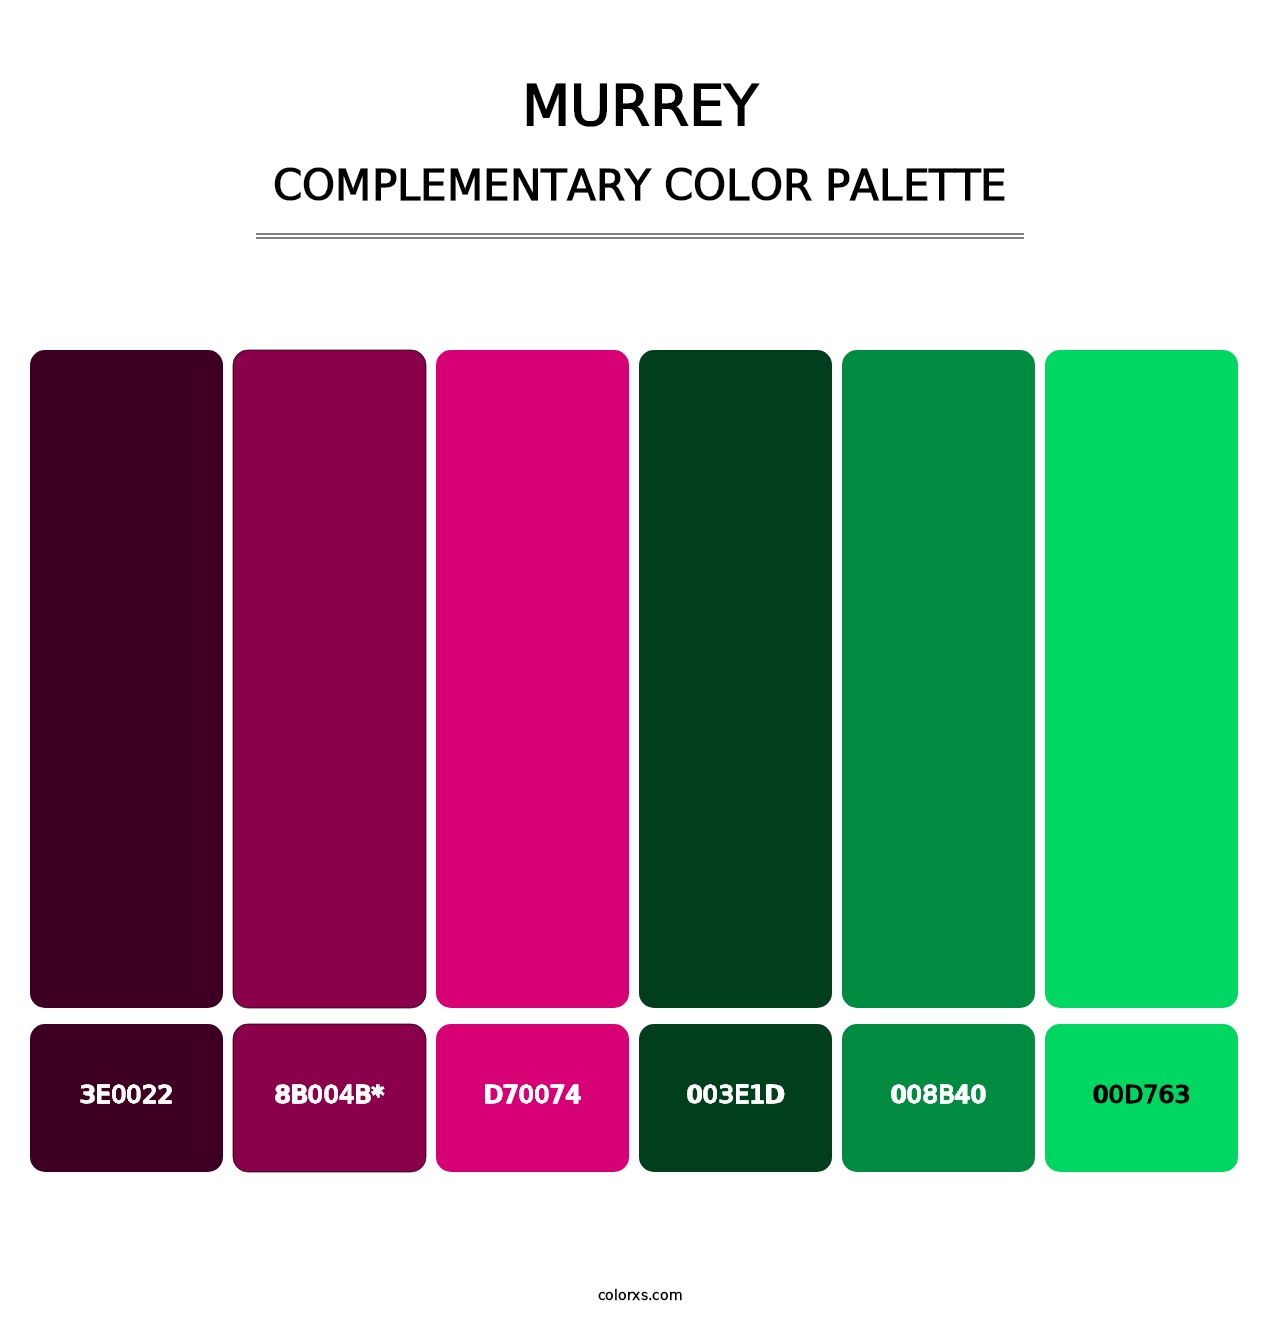 Murrey - Complementary Color Palette